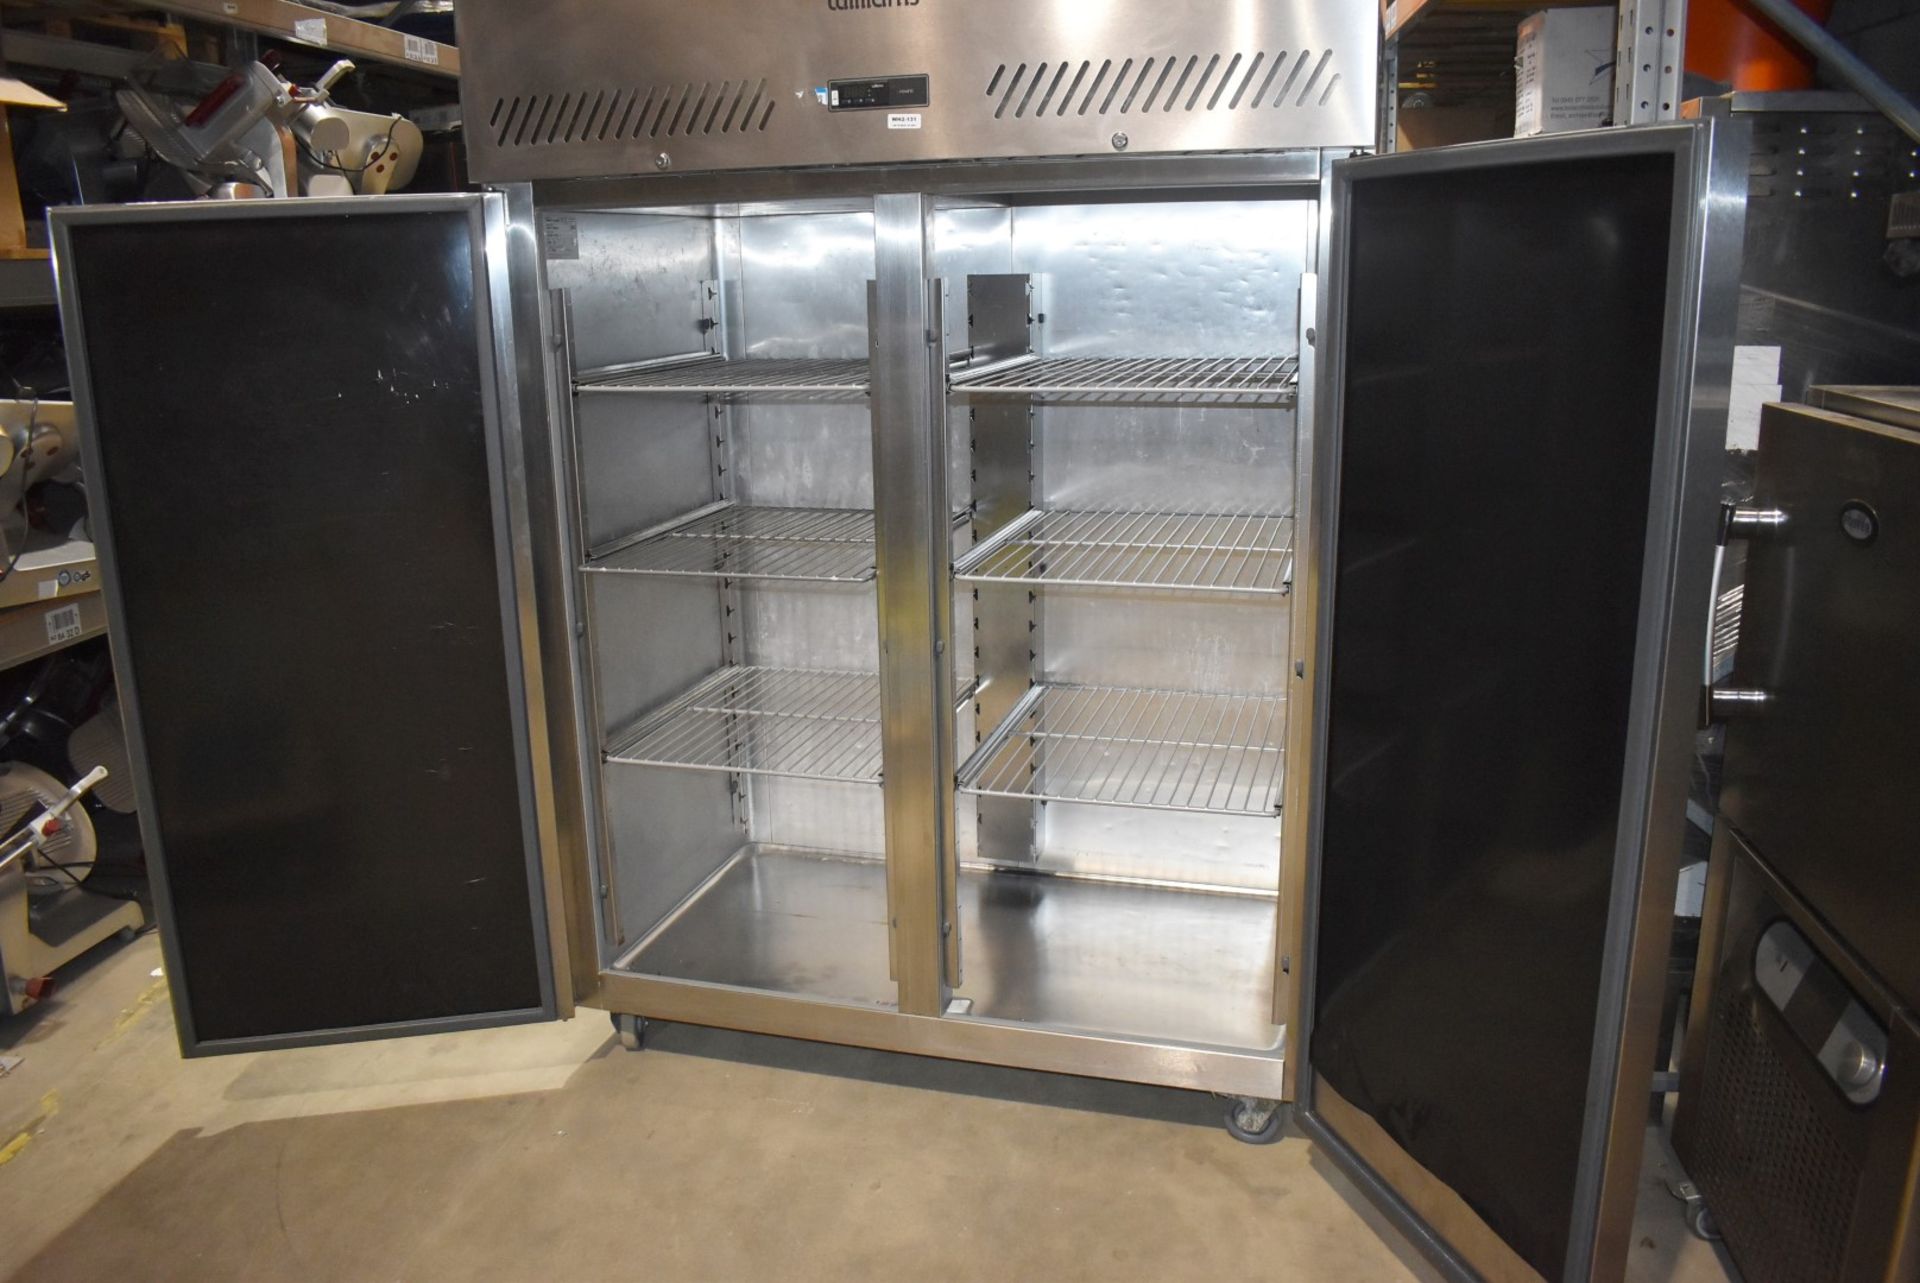 1 x Williams Upright Double Door Refrigerator With Stainless Steel Exterior - Model HS2SA - Recently - Image 20 of 20